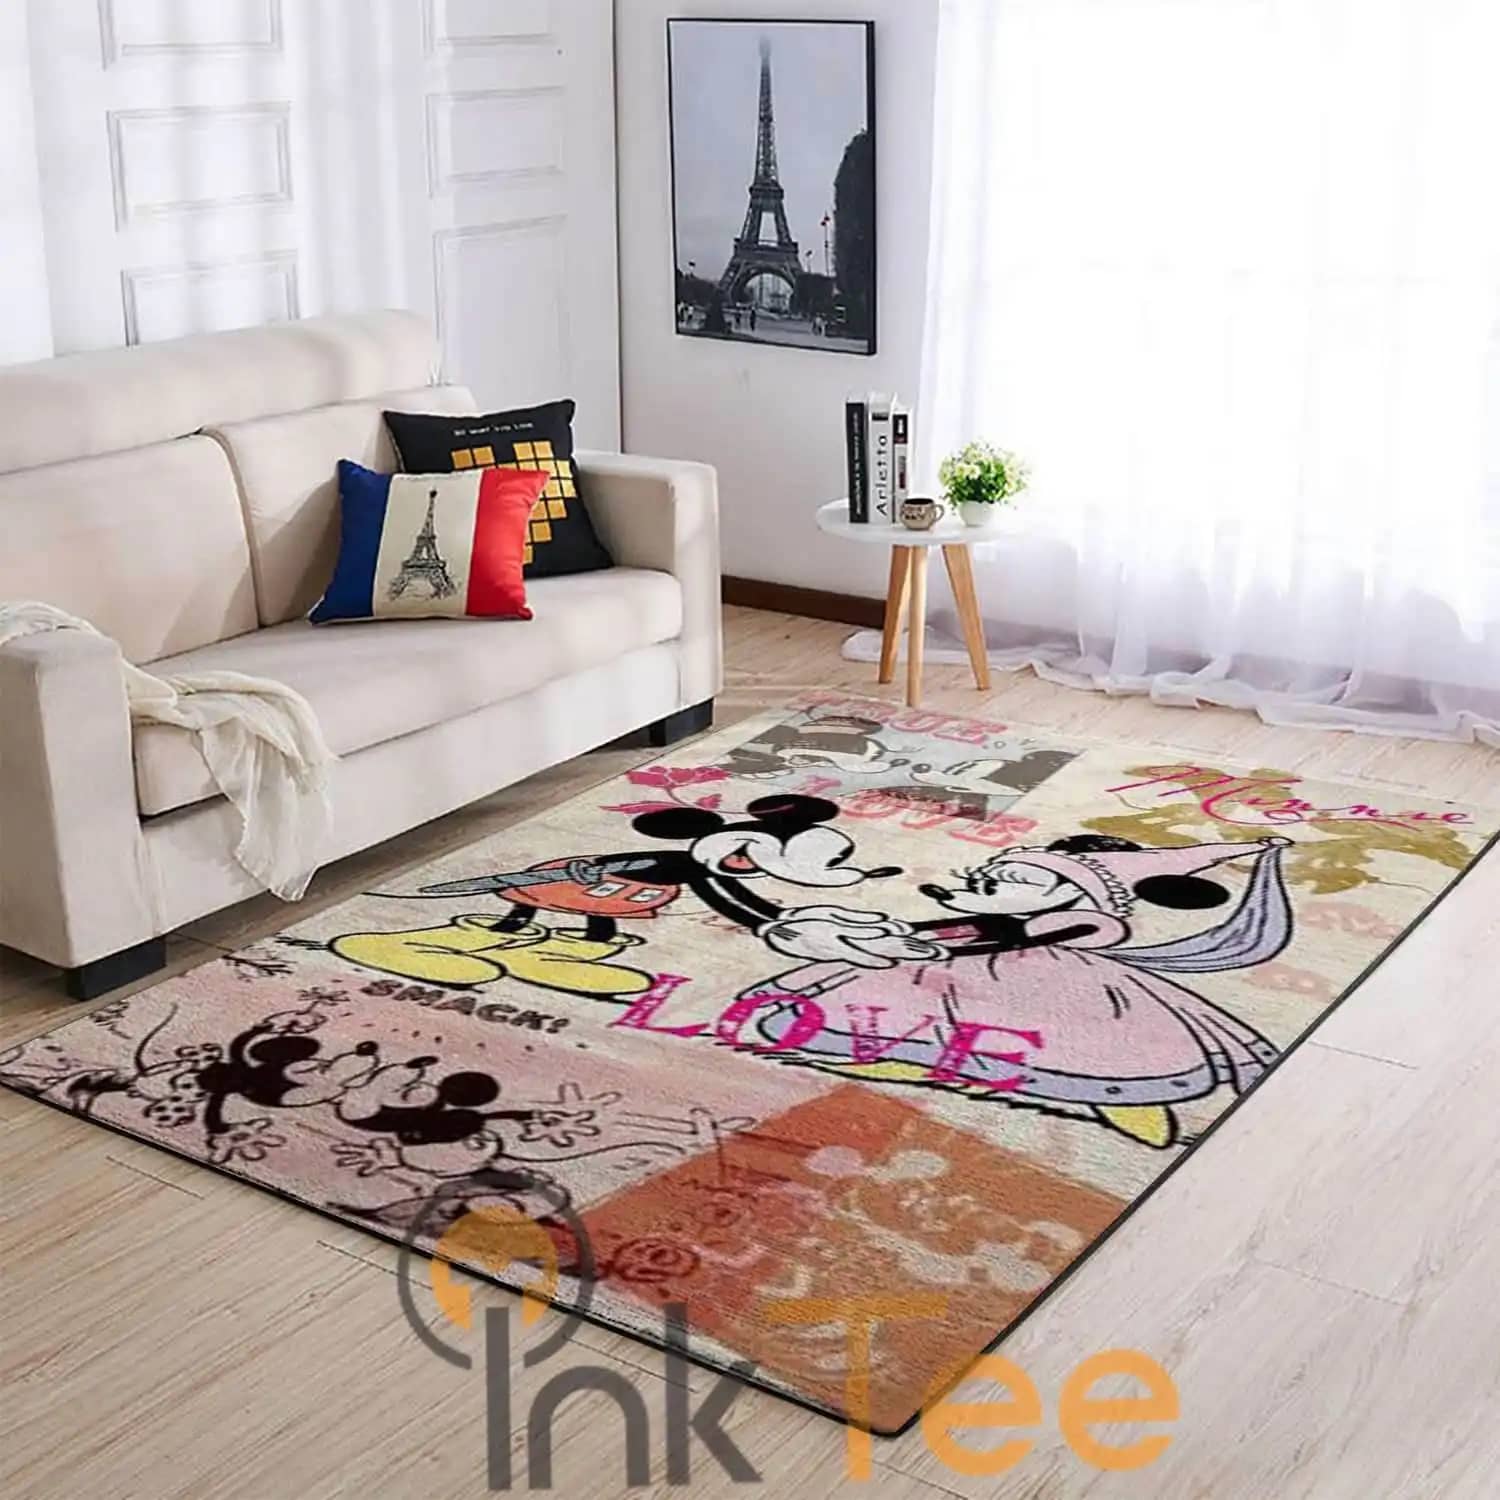 Minnie And Mickey Mouse Happy Couple Living Room Area Amazon 4107 Rug